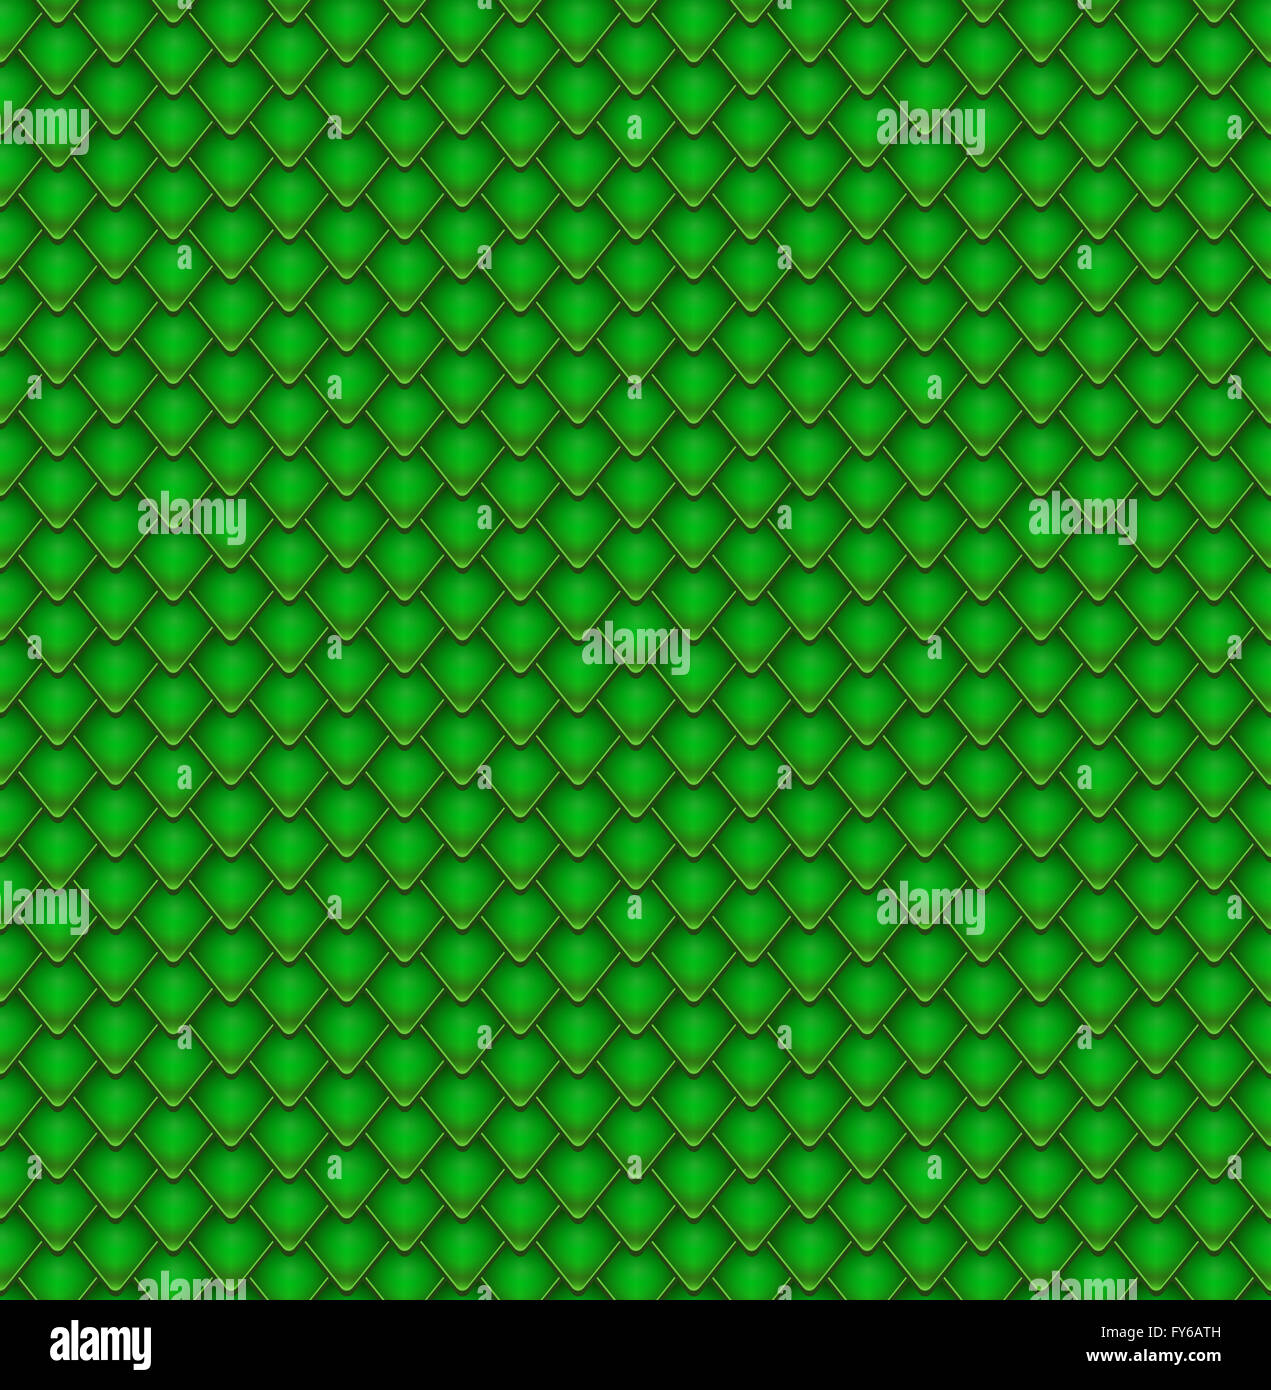 Reptile Scales Seamless Pattern Stock Photo